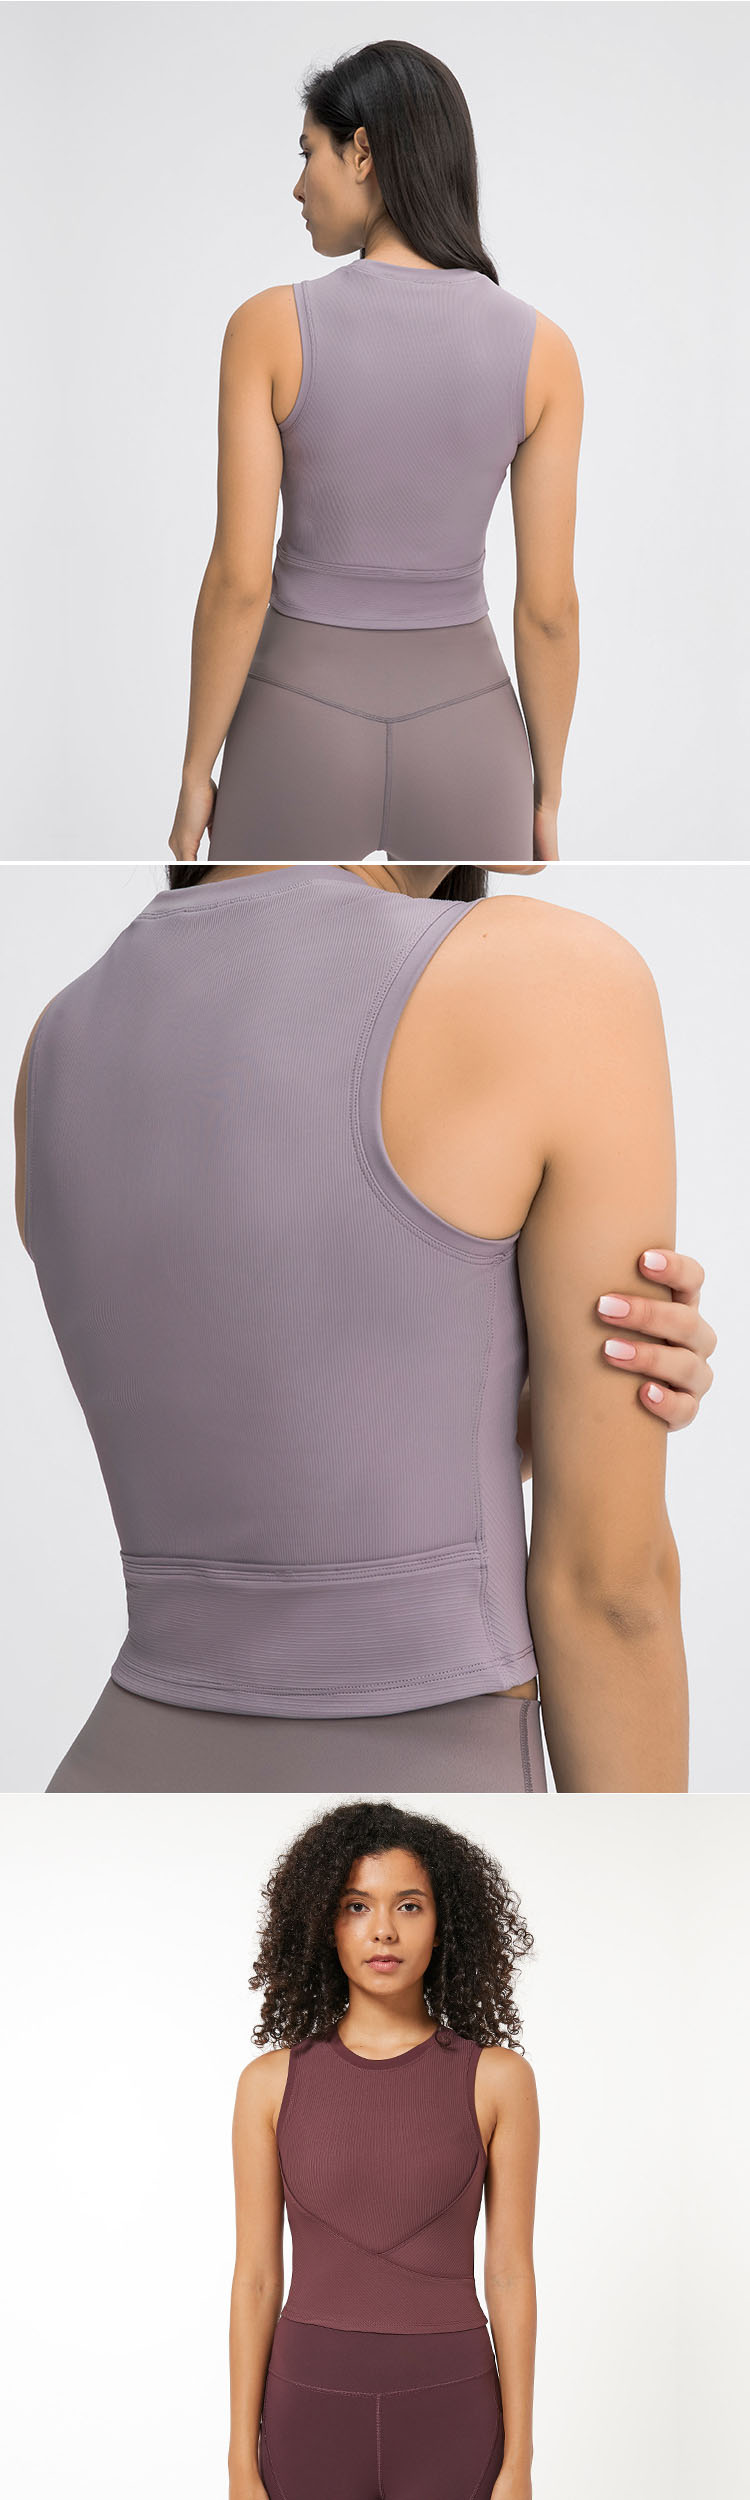 The sleeveless vest is more comfortable and free, and the movement is not stuffy.